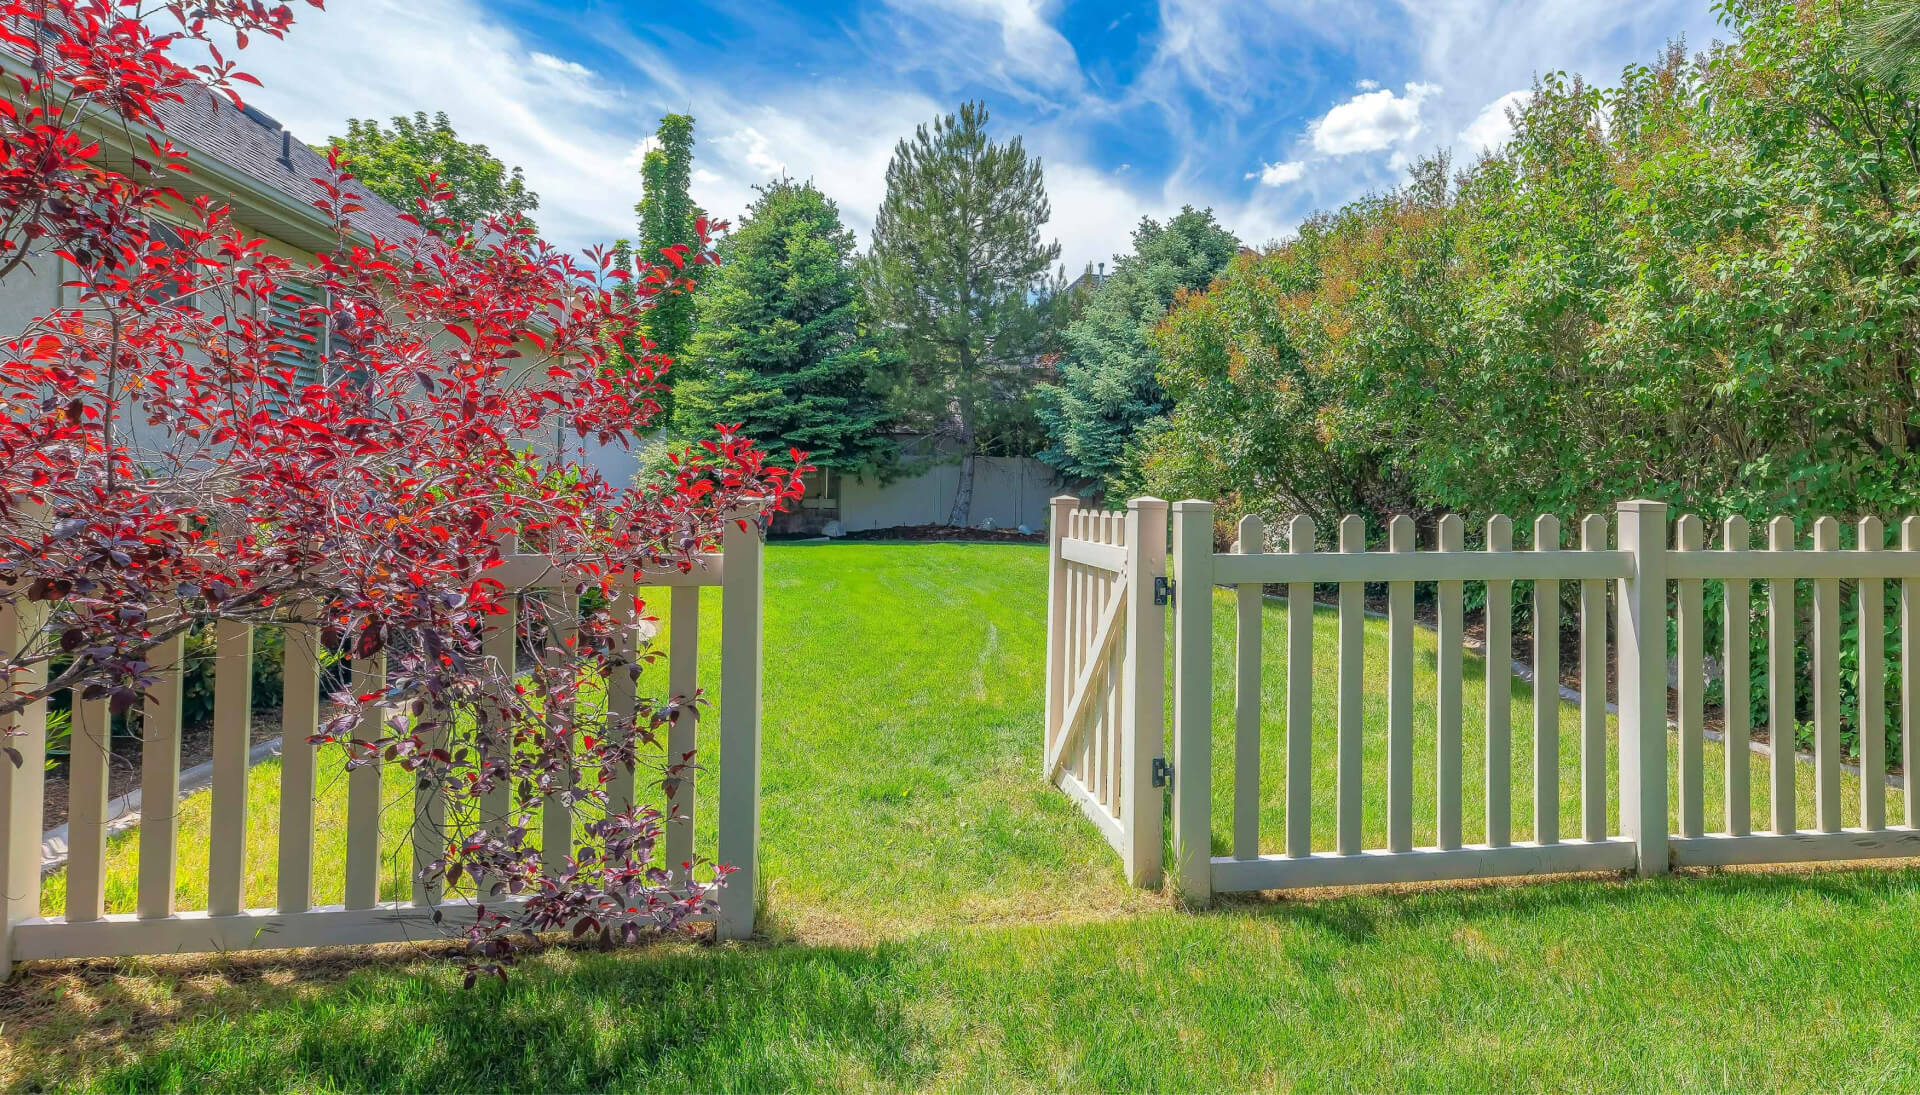 A functional fence gate providing access to a well-maintained backyard, surrounded by a wooden fence in Pittsburgh